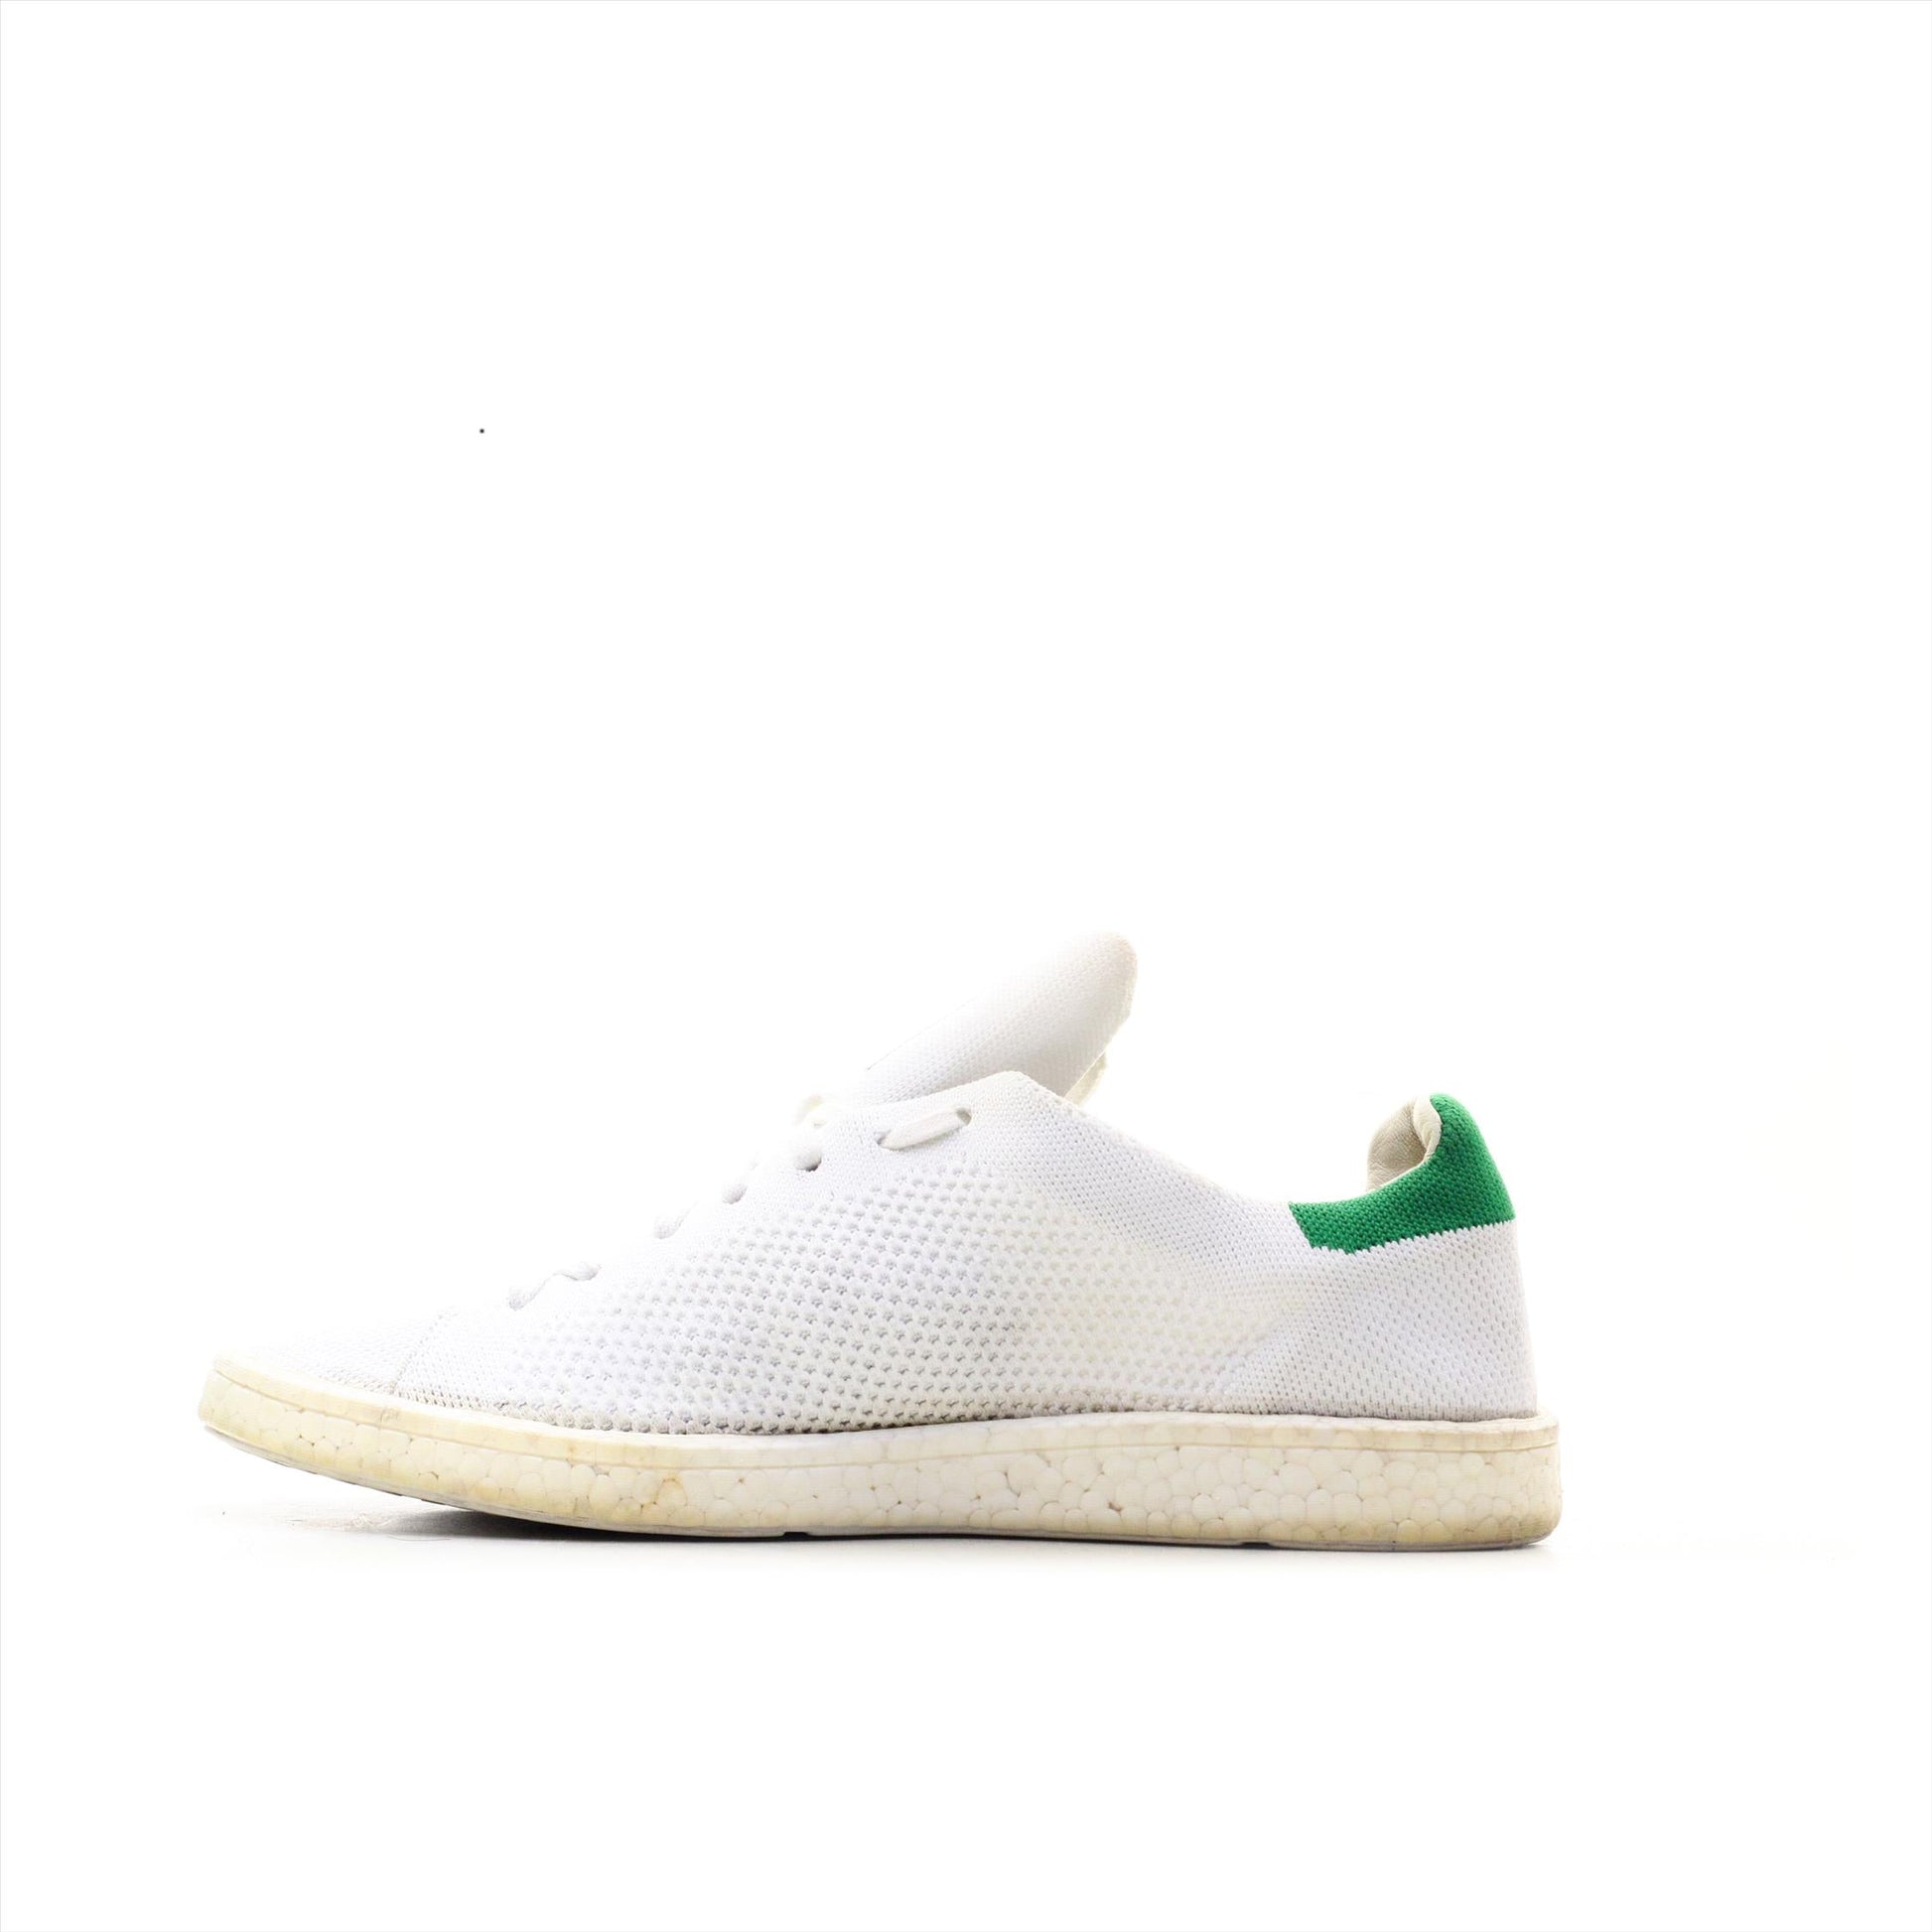 ADIDAS BOOST STANSMITH (Original USA Imported)